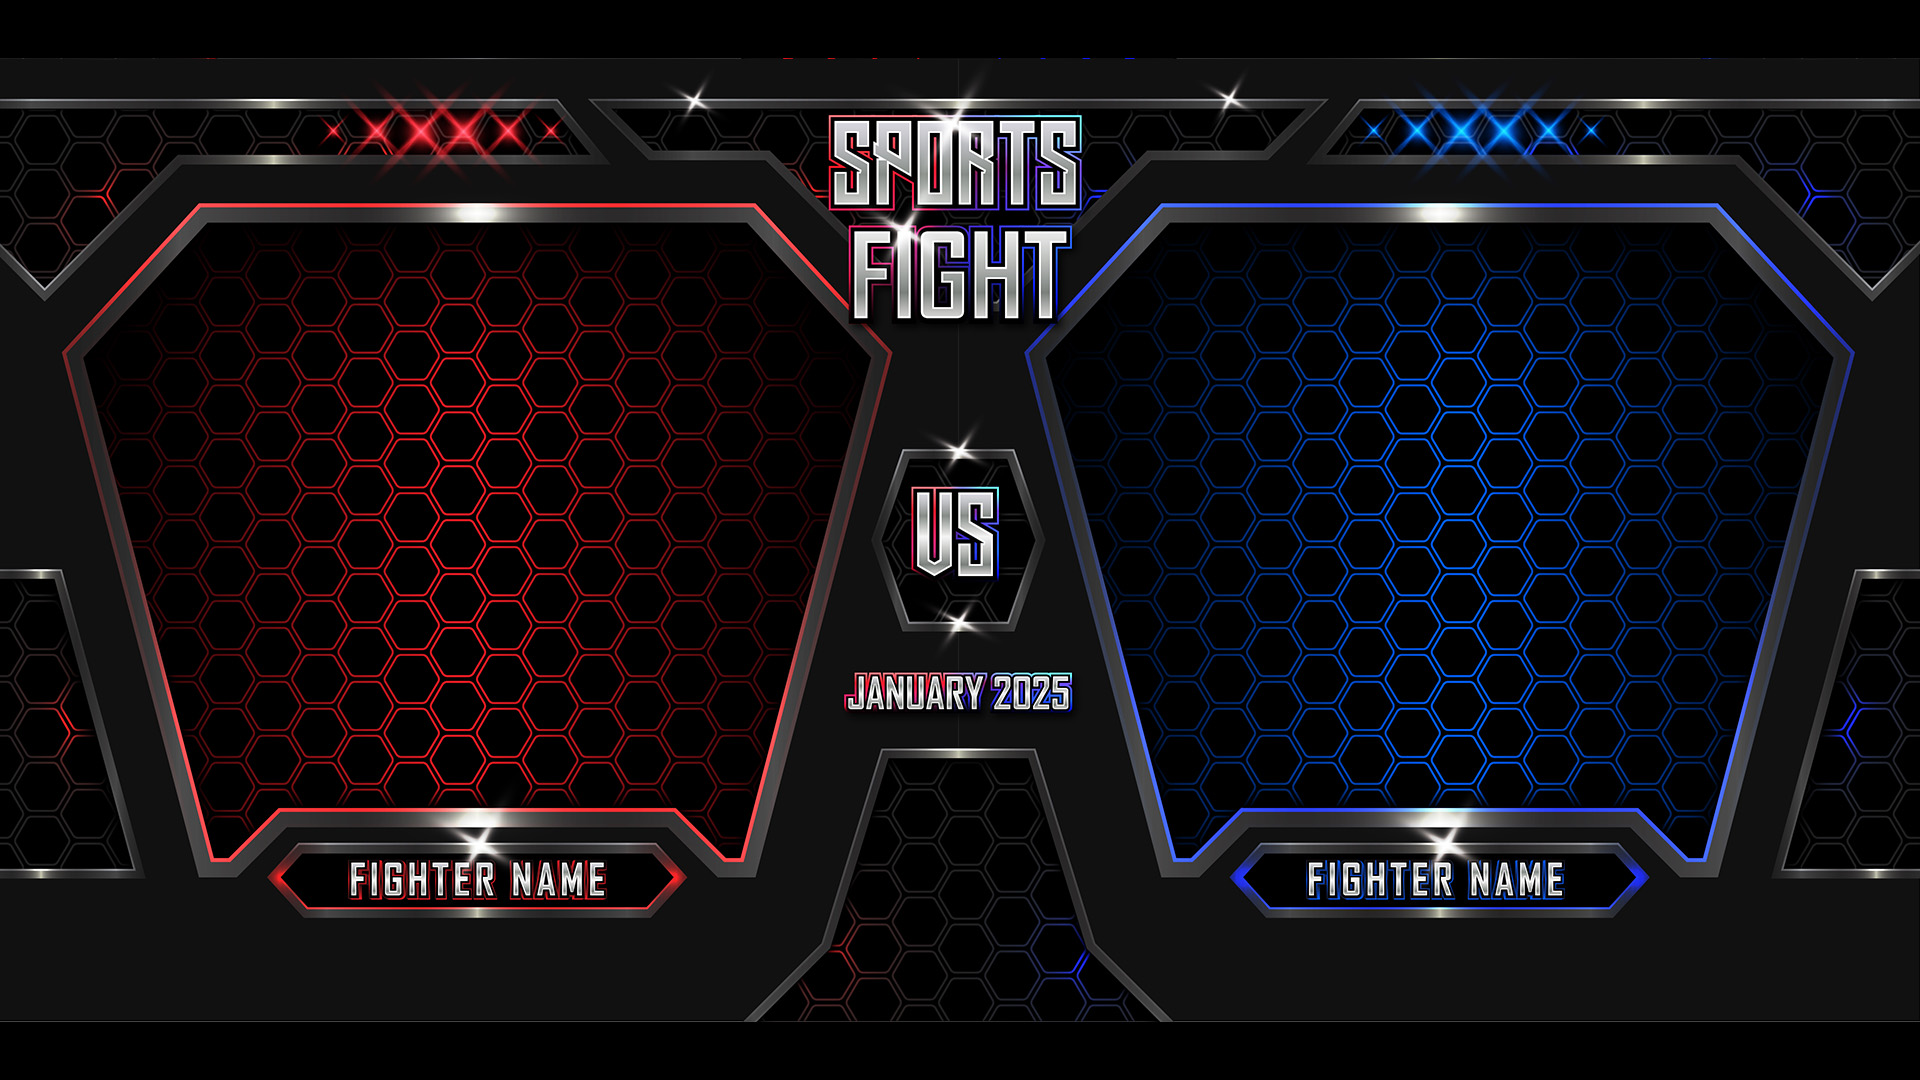 collection of 10 Sports Fight Posters and Backgrounds in 3D Realistic Style.